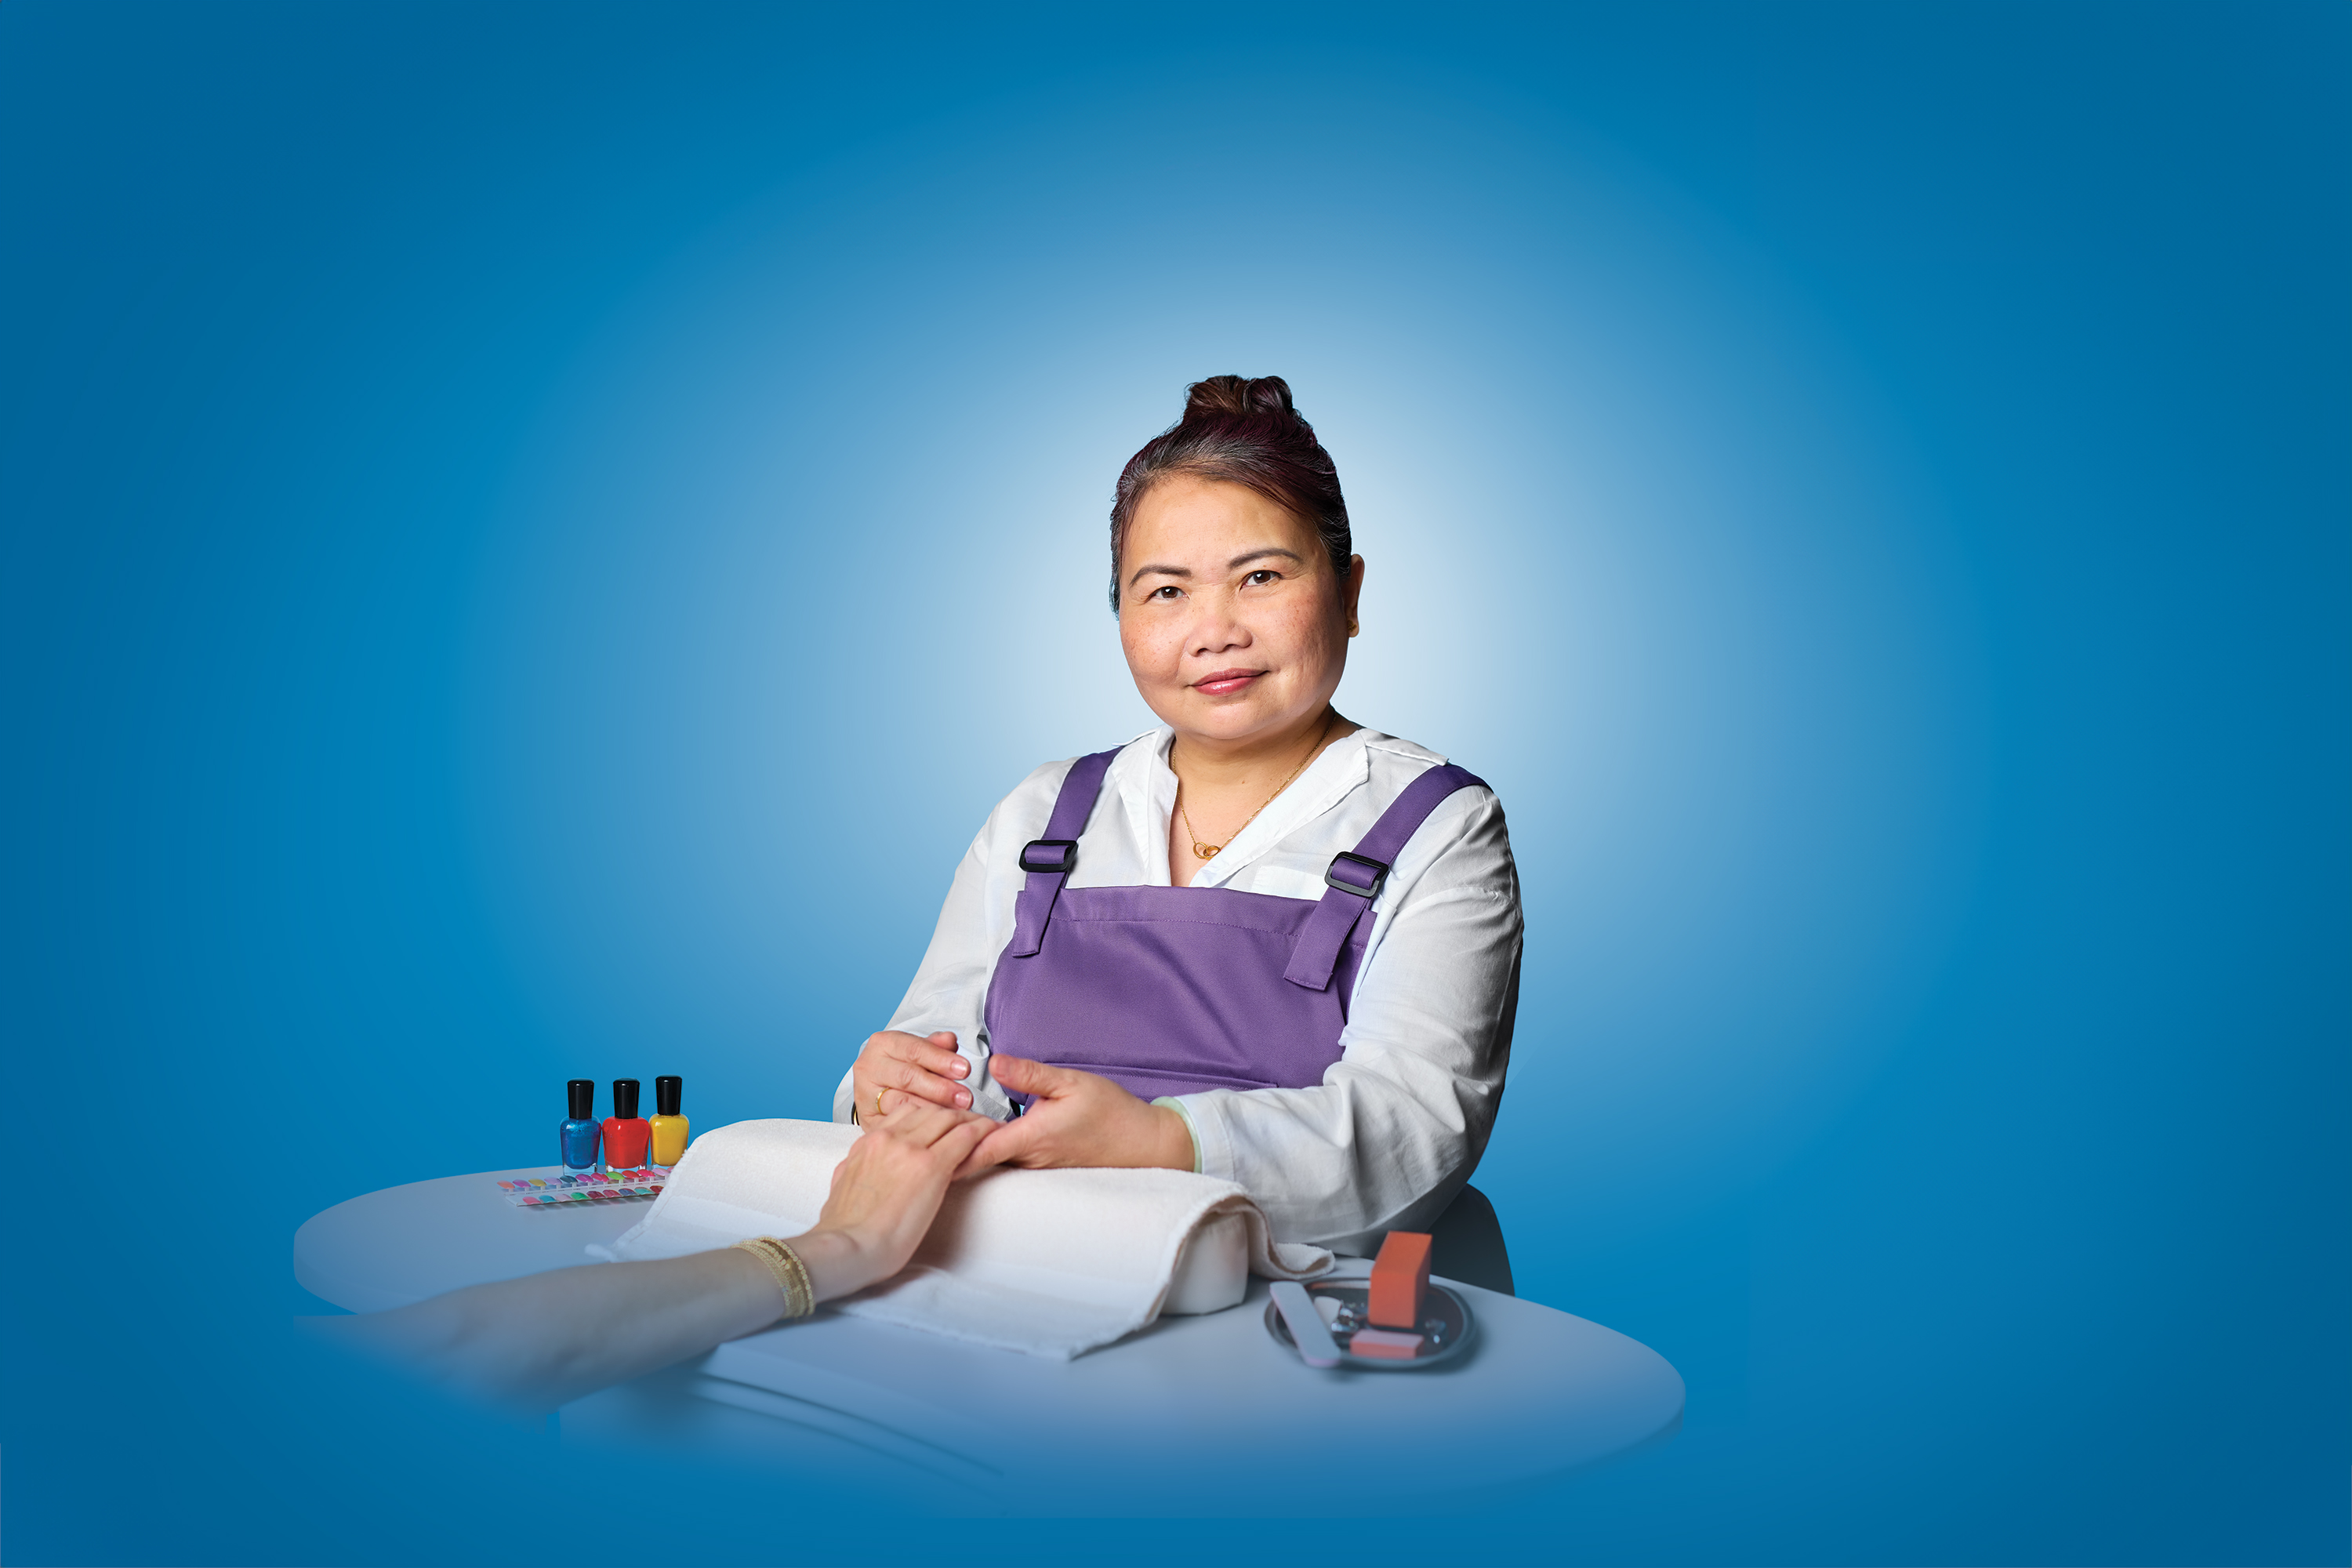 A sitting nail salon technician looks at the camera with a slight smile, wearing a purple apron 